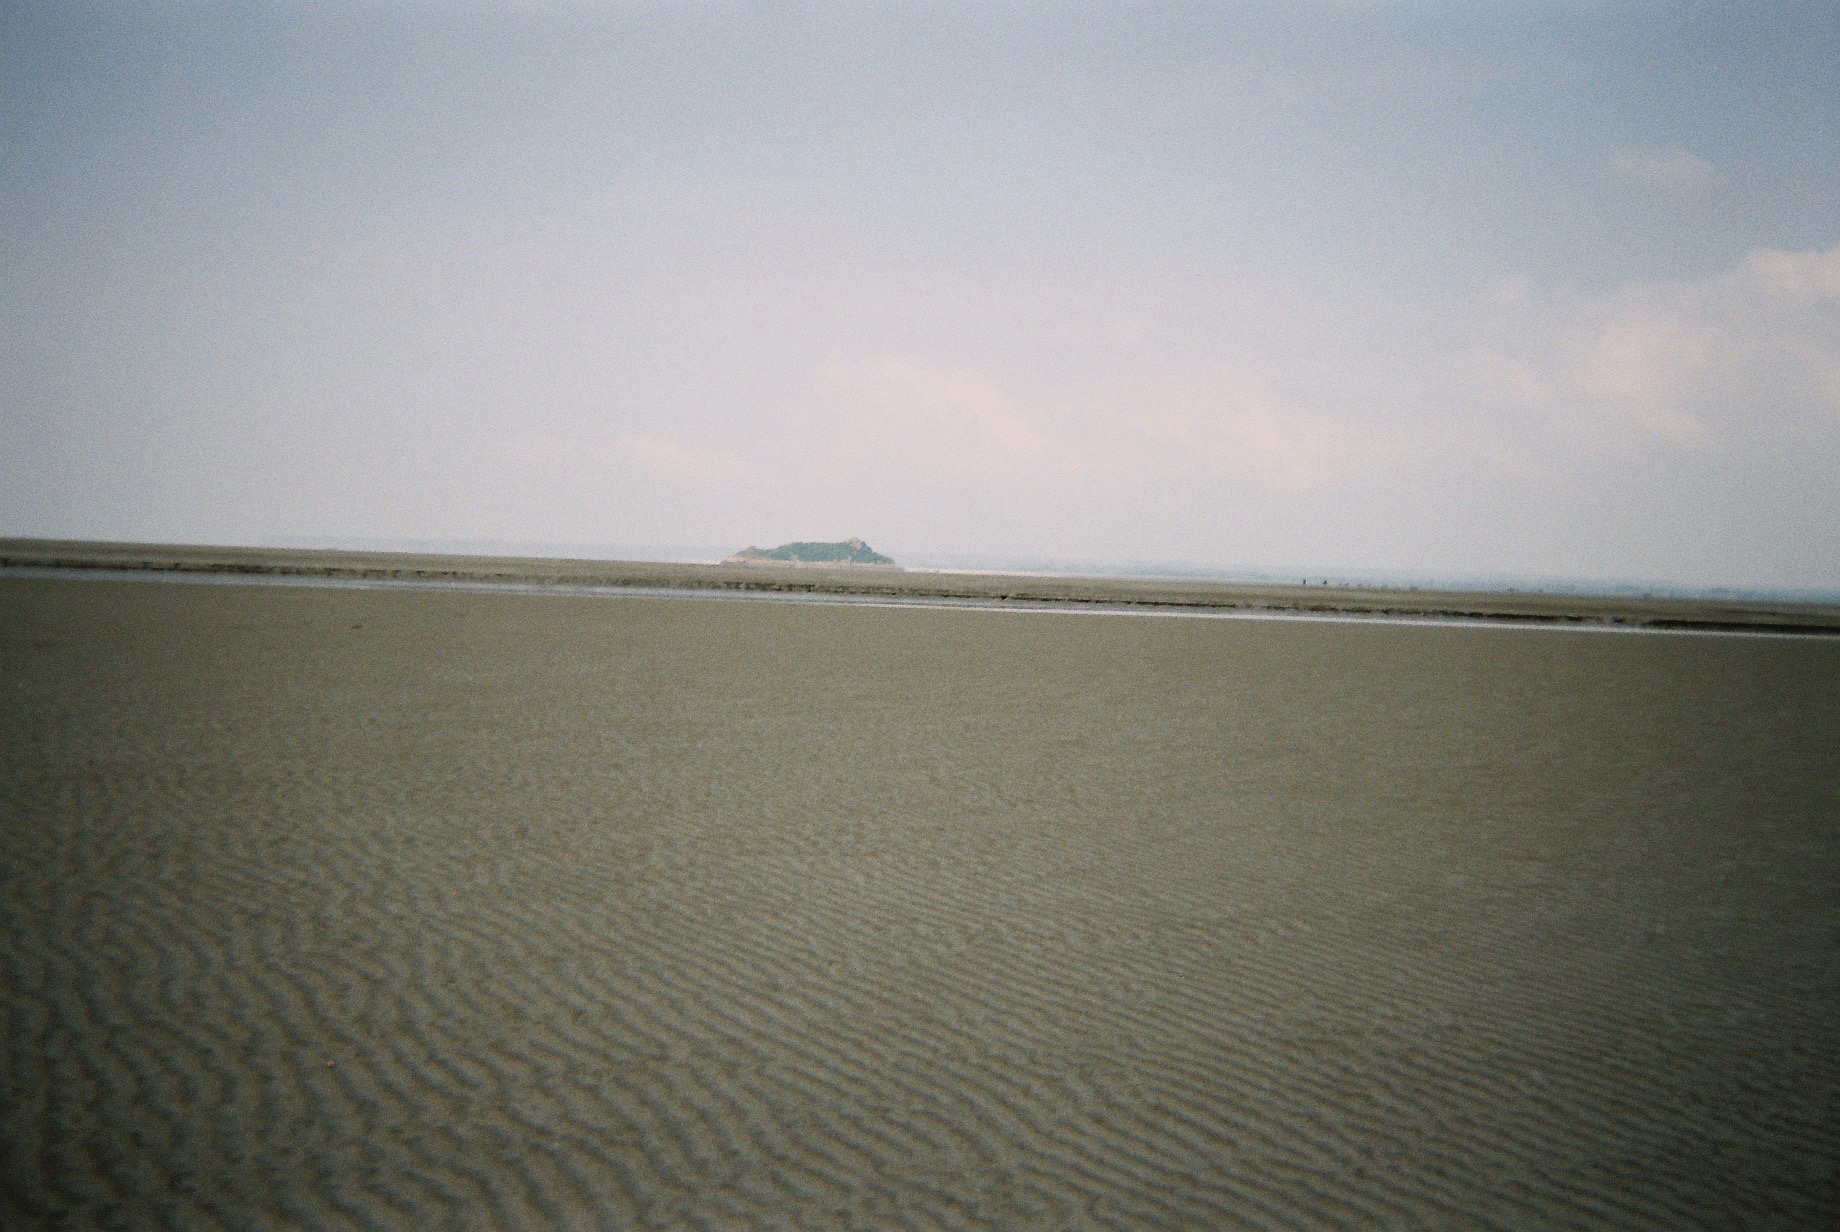 a large flat sand area with a small island in the distance